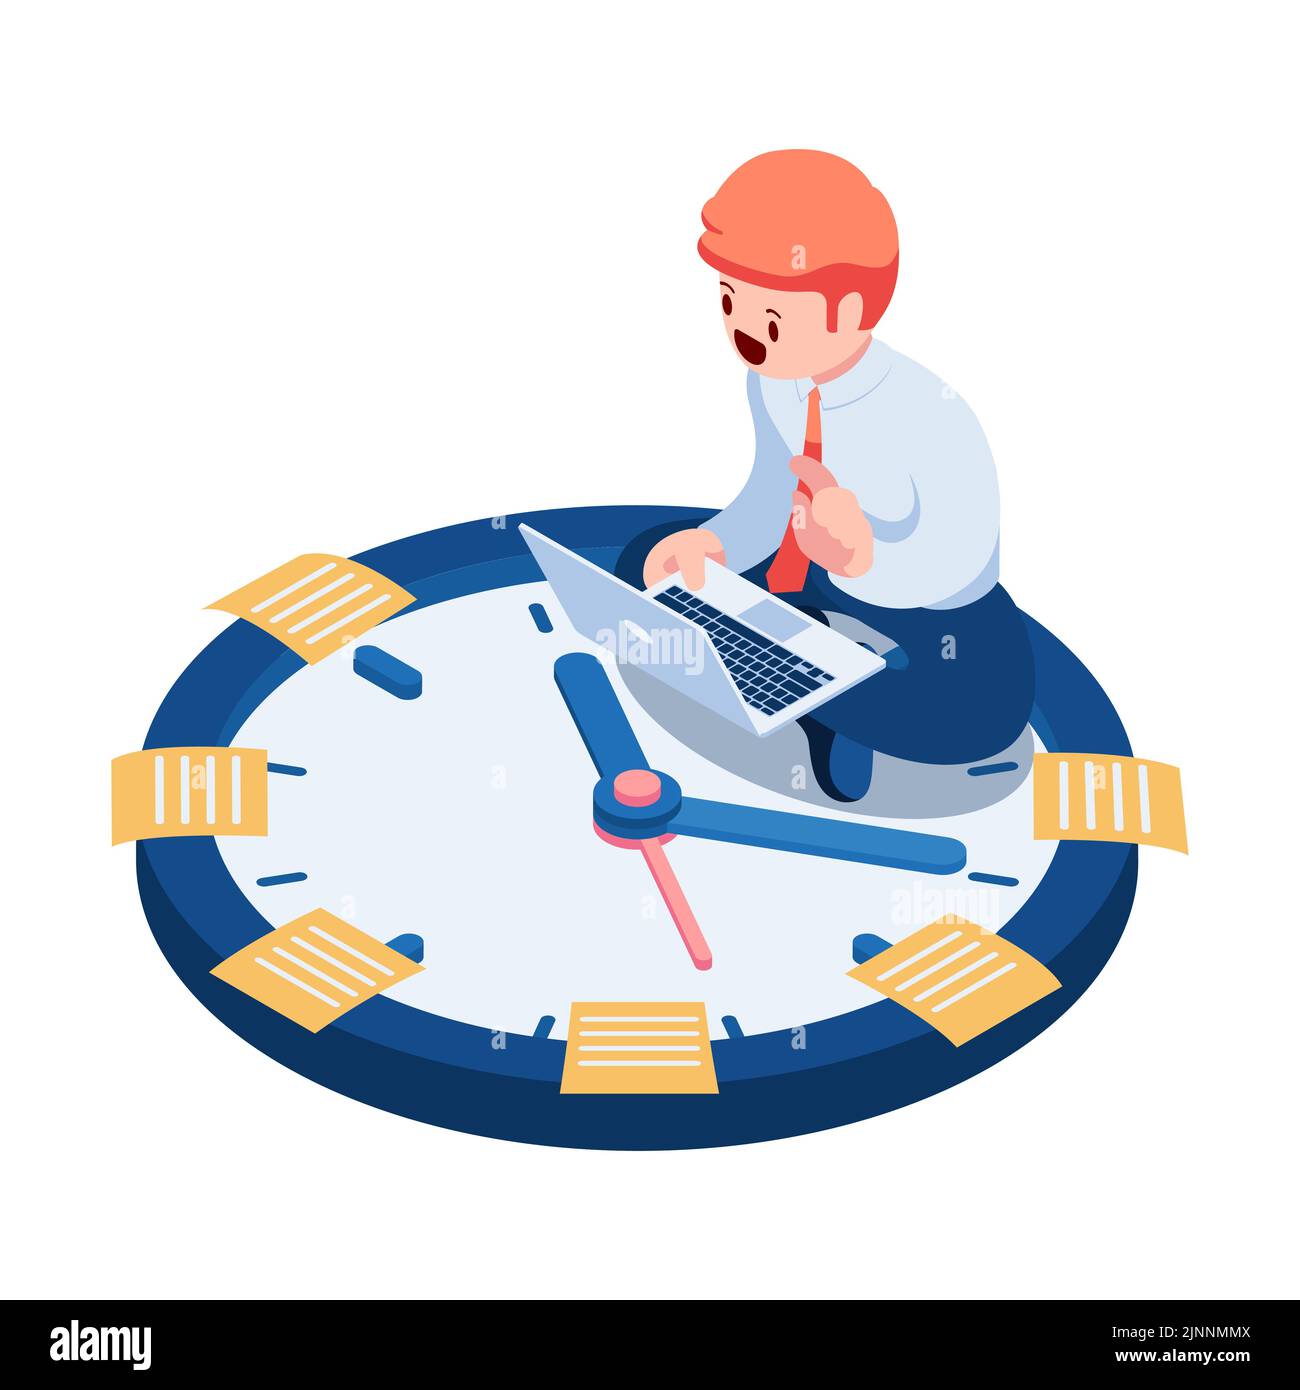 Flat 3d Isometric Businessman Sitting on Clock with Sticky Note. Business Schedule and Reminders Concept. Stock Vector